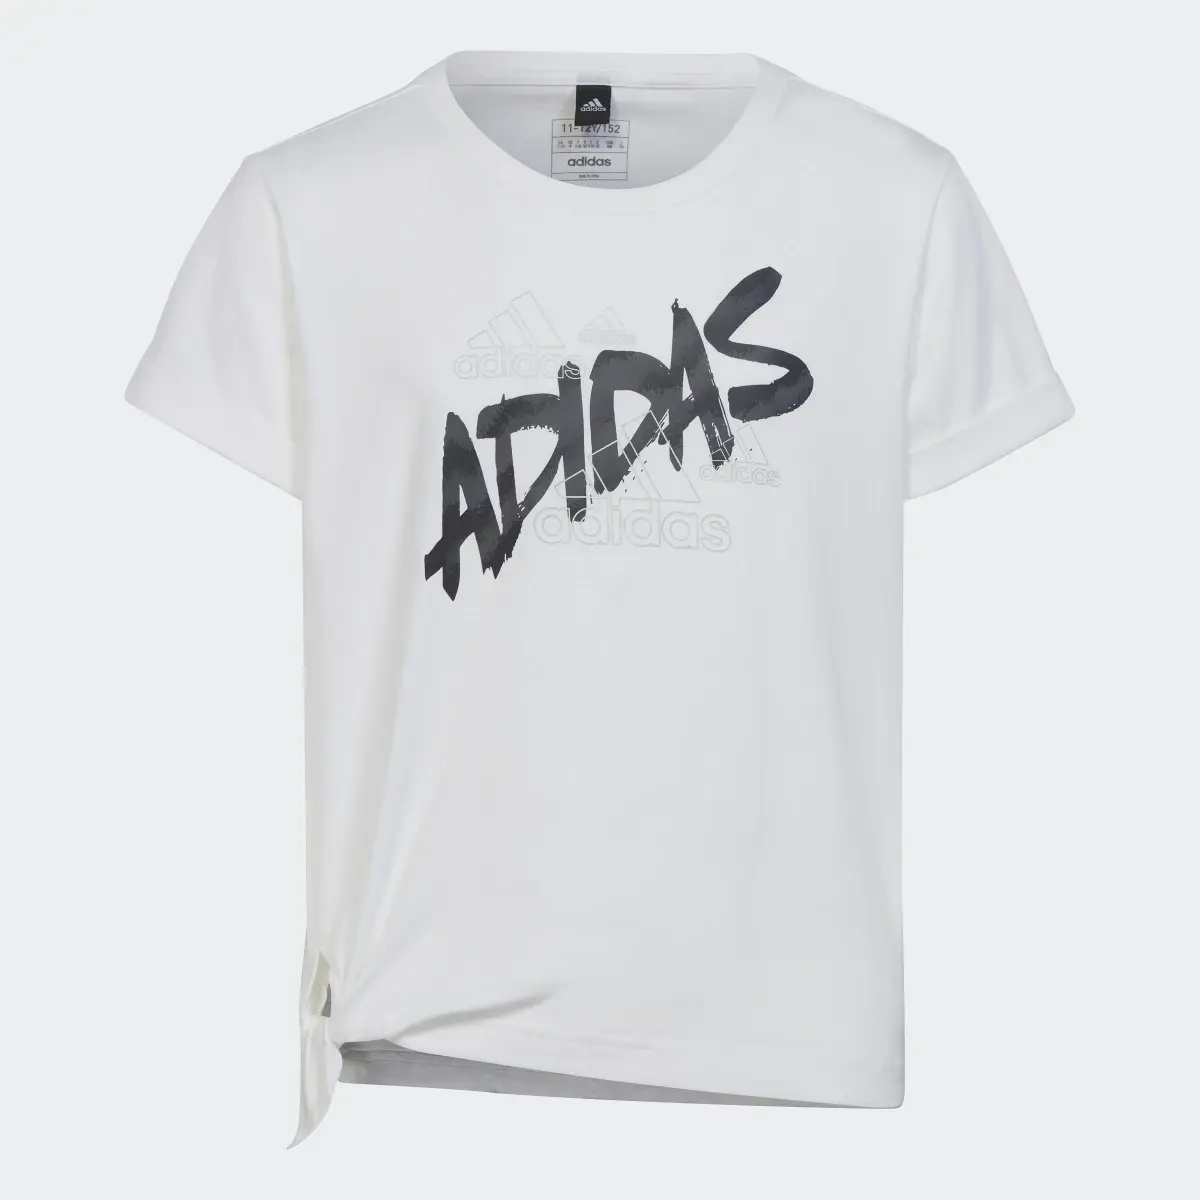 Adidas Dance Knotted Tee. 1